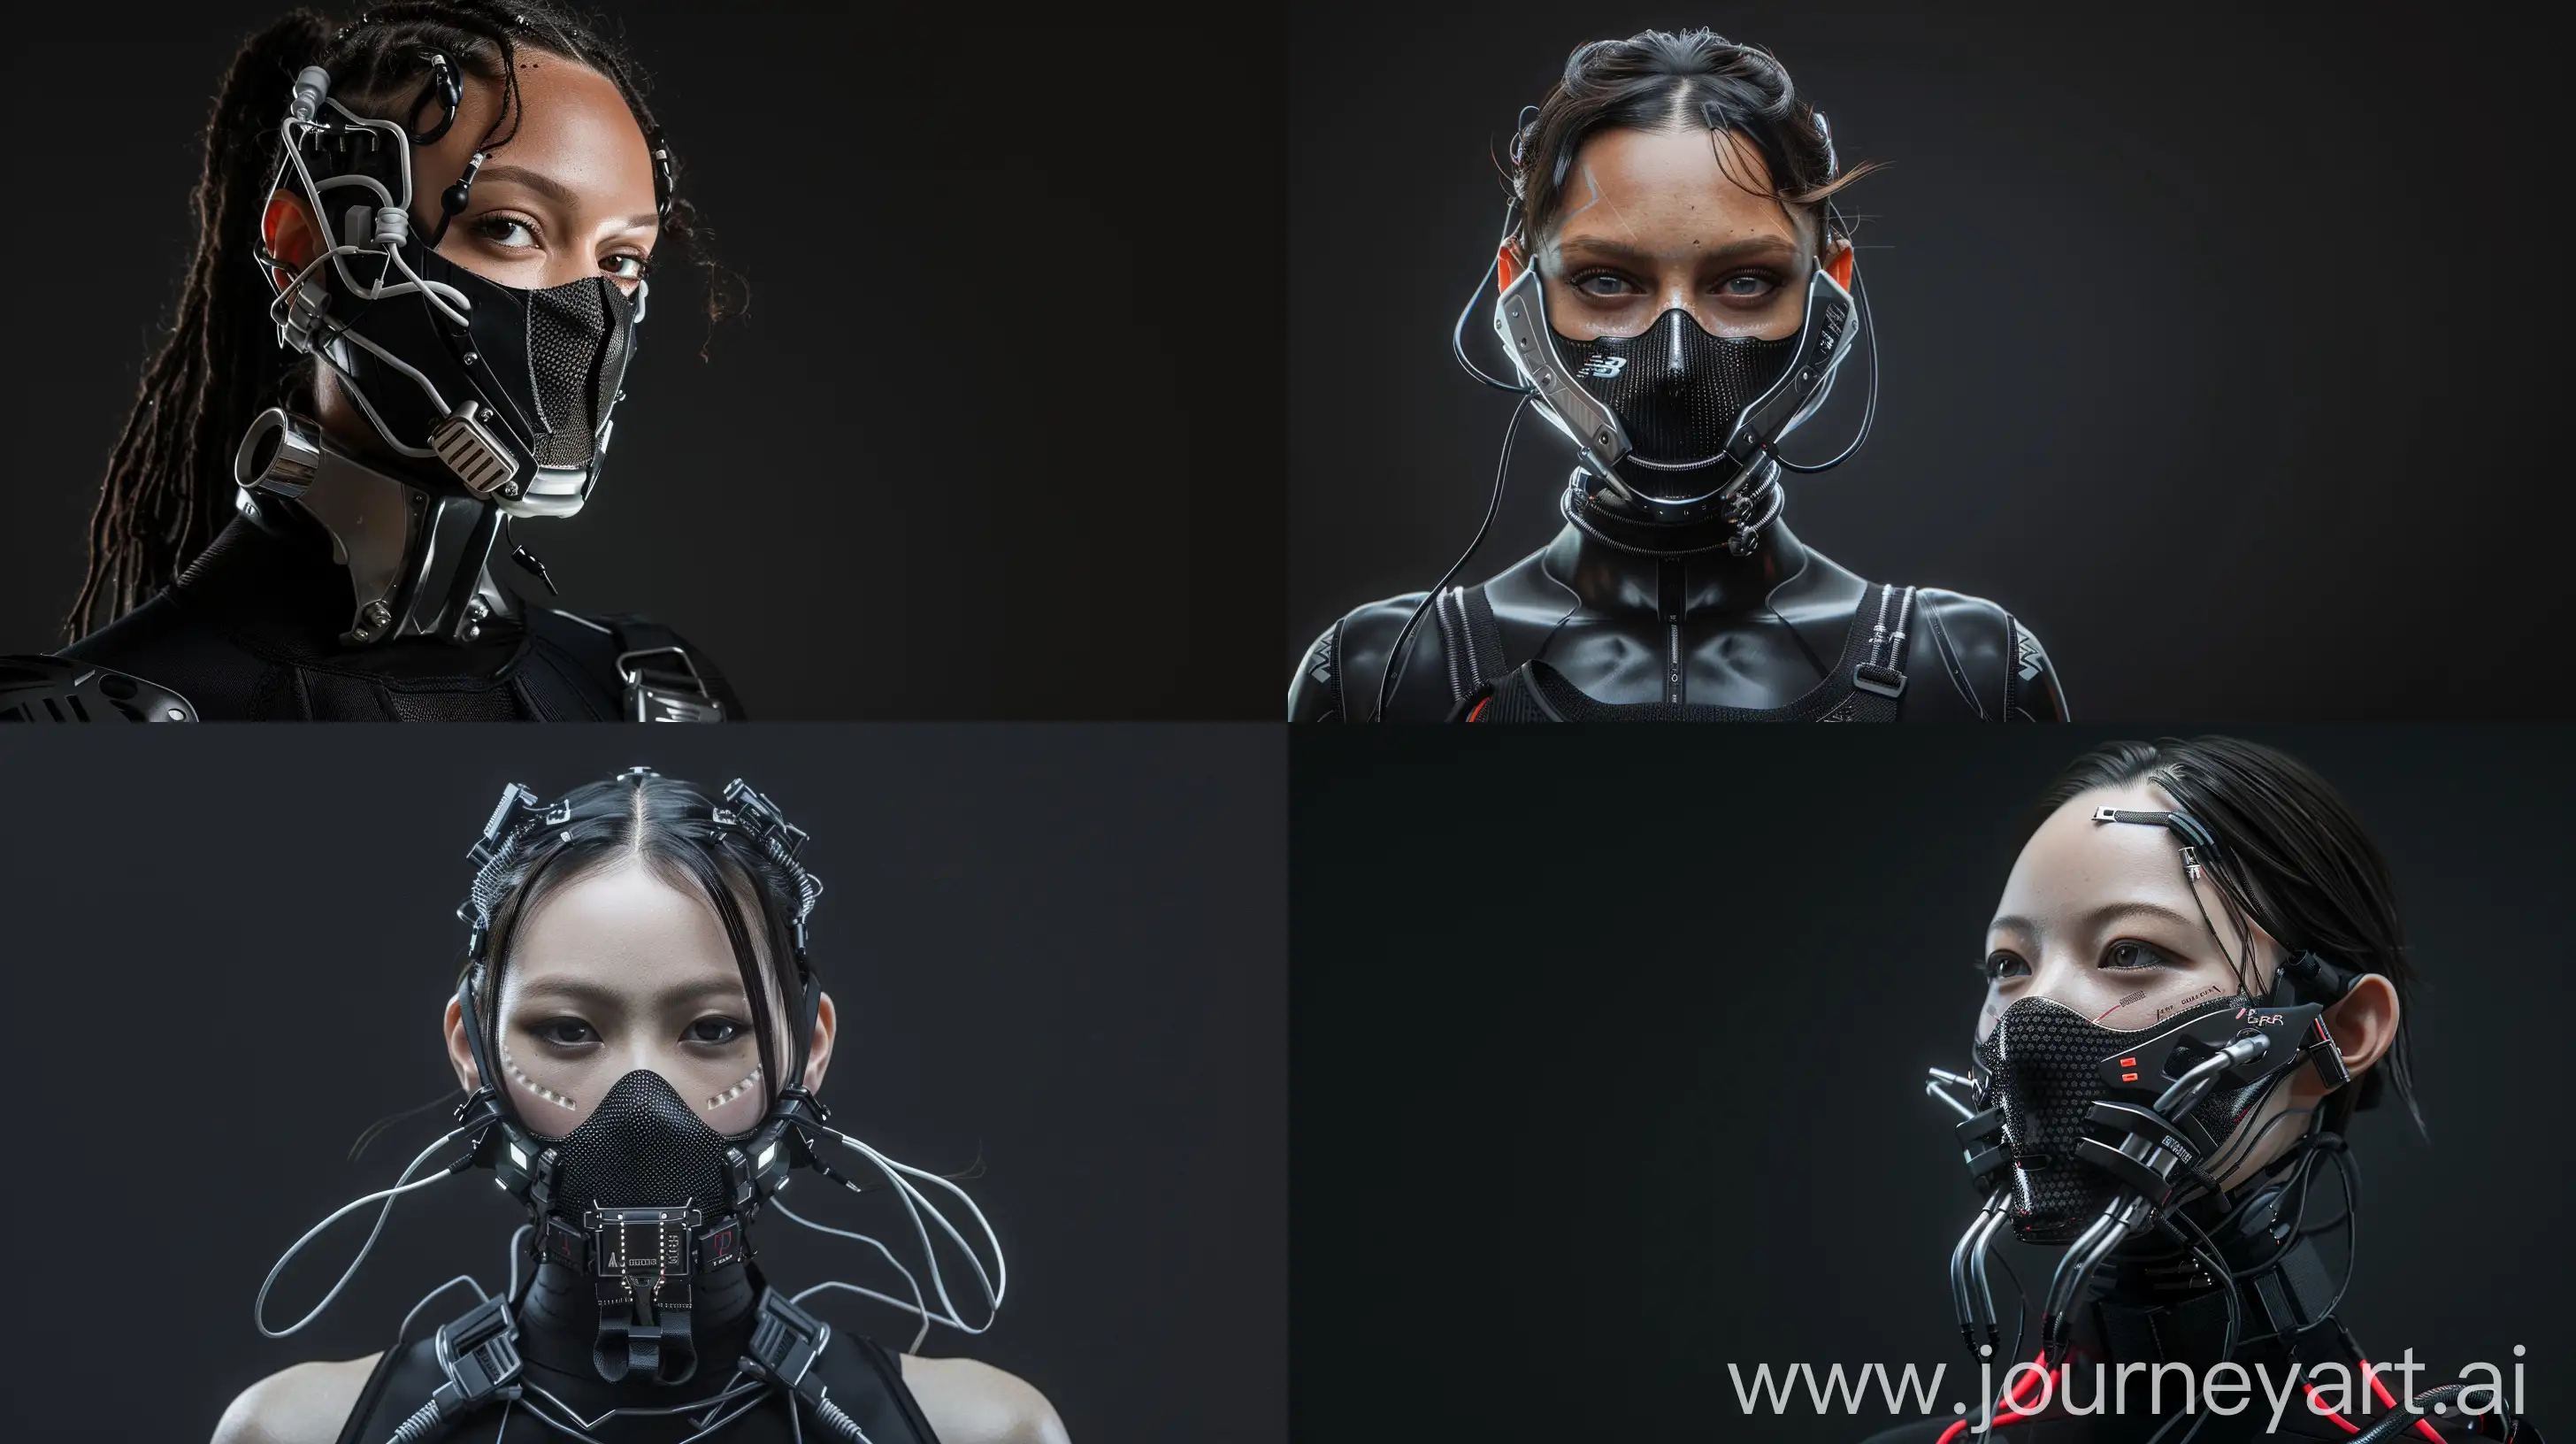 Against a sleek black backdrop, witness the captivating presence of a Beautiful characther adorned with a cybernetic mouth covering mask. It seamlessly merges cutting edge technology with intricate details, showcasing carbon fiber textures, sleek aluminum accents, and pulsating wires. Symbolizing the delicate equilibrium between humanity and machine, her appearance embodies the essence of a futuristic cyberpunk aesthetic, further accentuated by New Balance inspired add ons. With dynamic movements reminiscent of action packed film sequences, accompanied by cinematic haze and an electric energy, she exudes an irresistible allure that commands attention --v 6 --ar 16:9